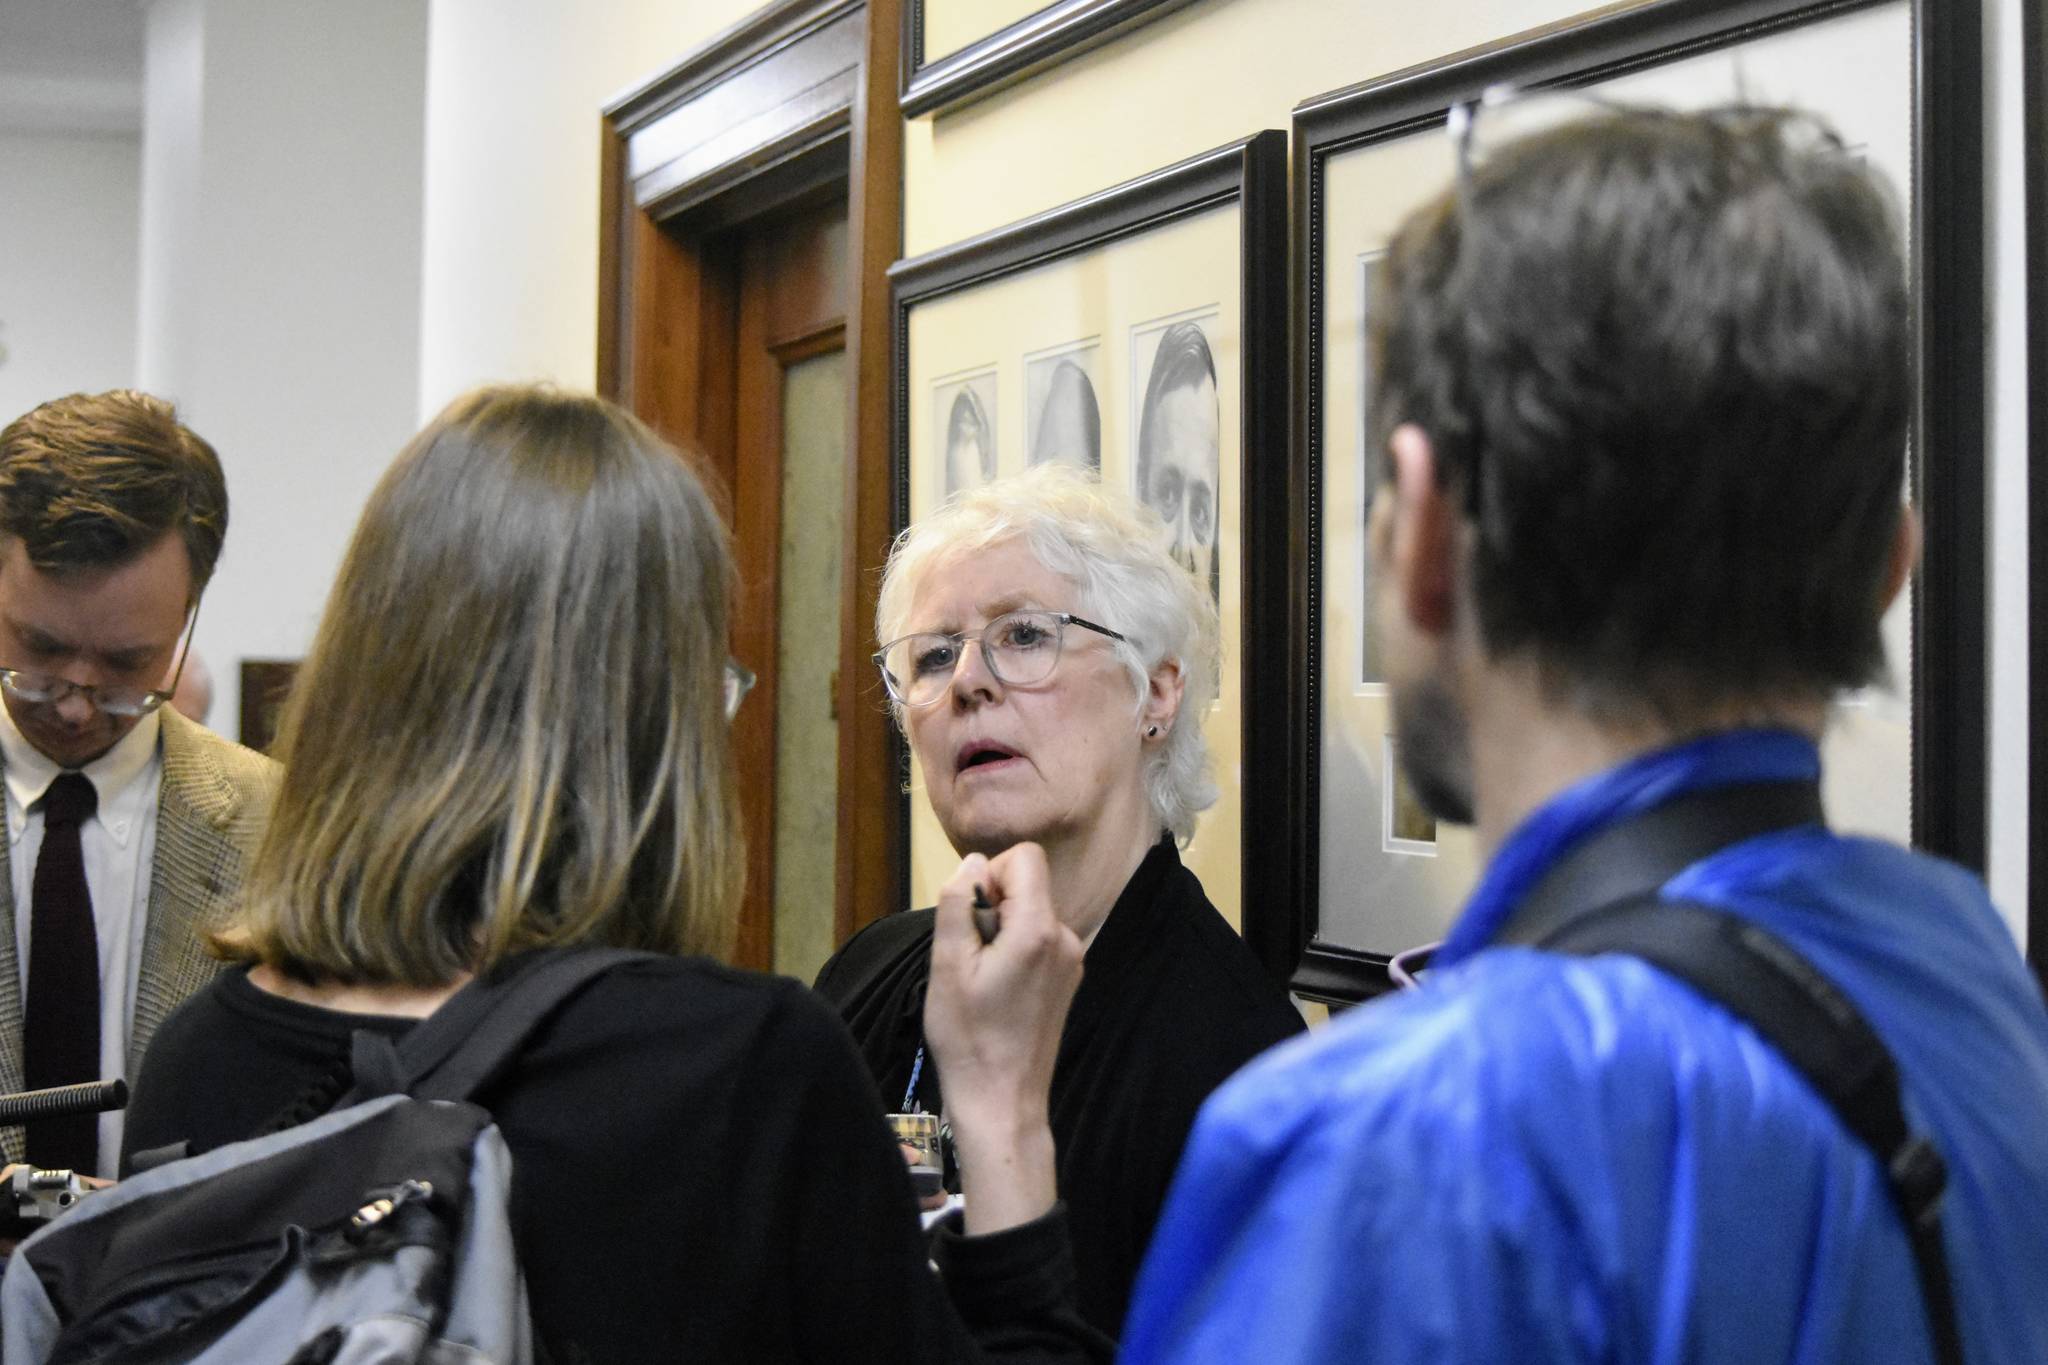 House Speaker Louise Stutes, R-Kodiak, told reporters on Friday she was optimistic a deal with the House minority caucus would be reached by Monday. Both Stutes and Minority Leader Cathy Tilton, R-Wasilla, declined to give details on the deal. (Peter Segall / Juneau Empire)